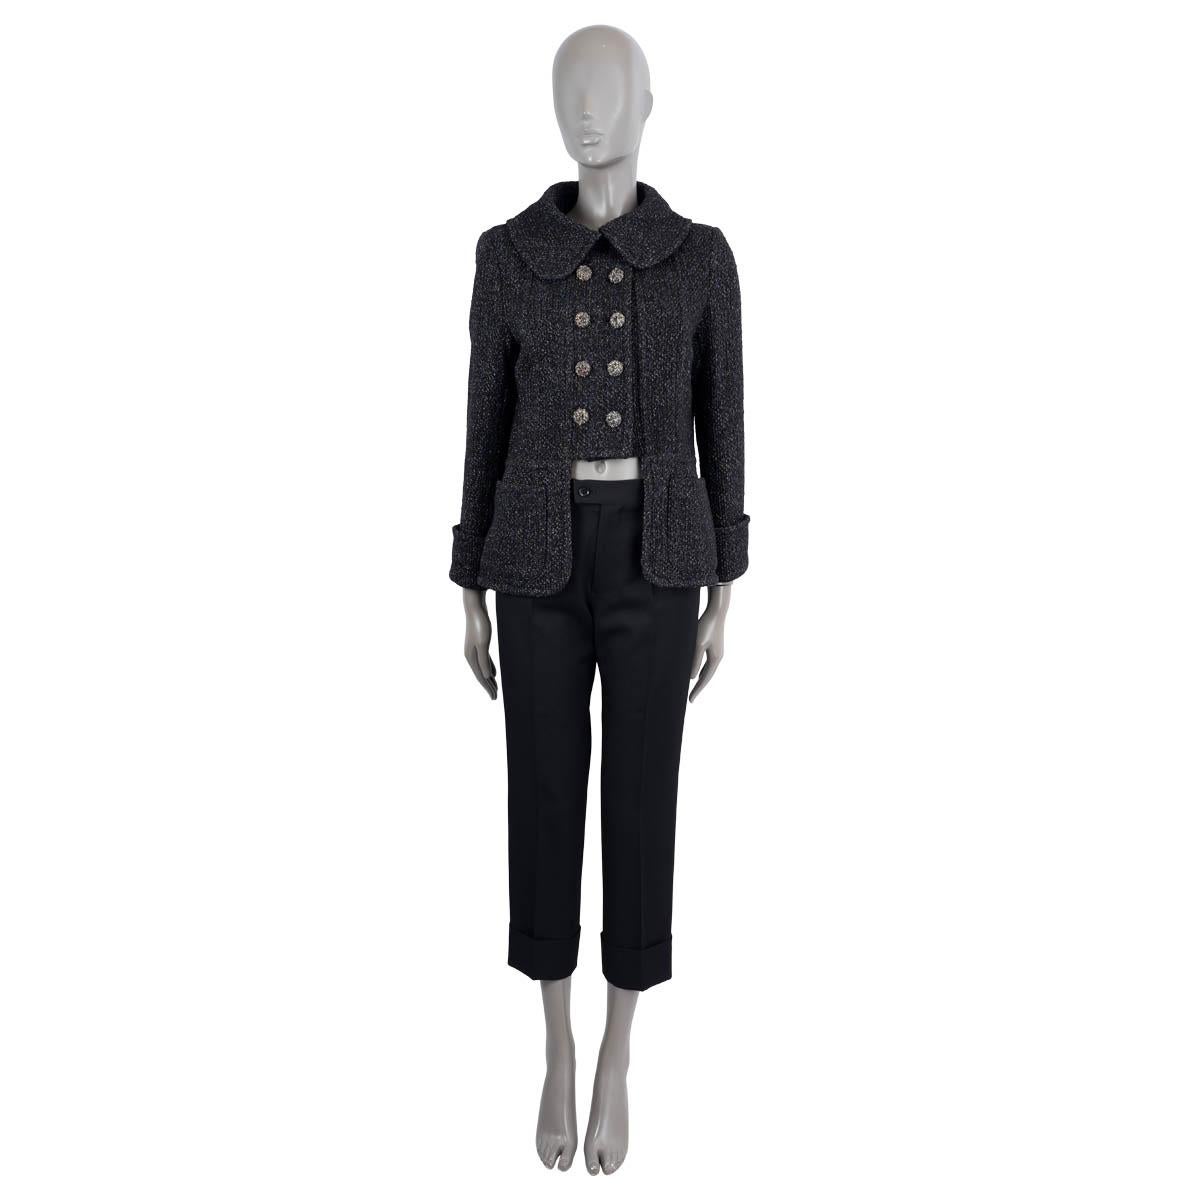 100% authentic Chanel double-breasted peter pan-collar tweed jacket in midnight blue and black polyamide (50%), wool (40%) and polyester (10%). Lined in black silk (100%). The design features a cut-out detail at front, a buttoned slit on the back,